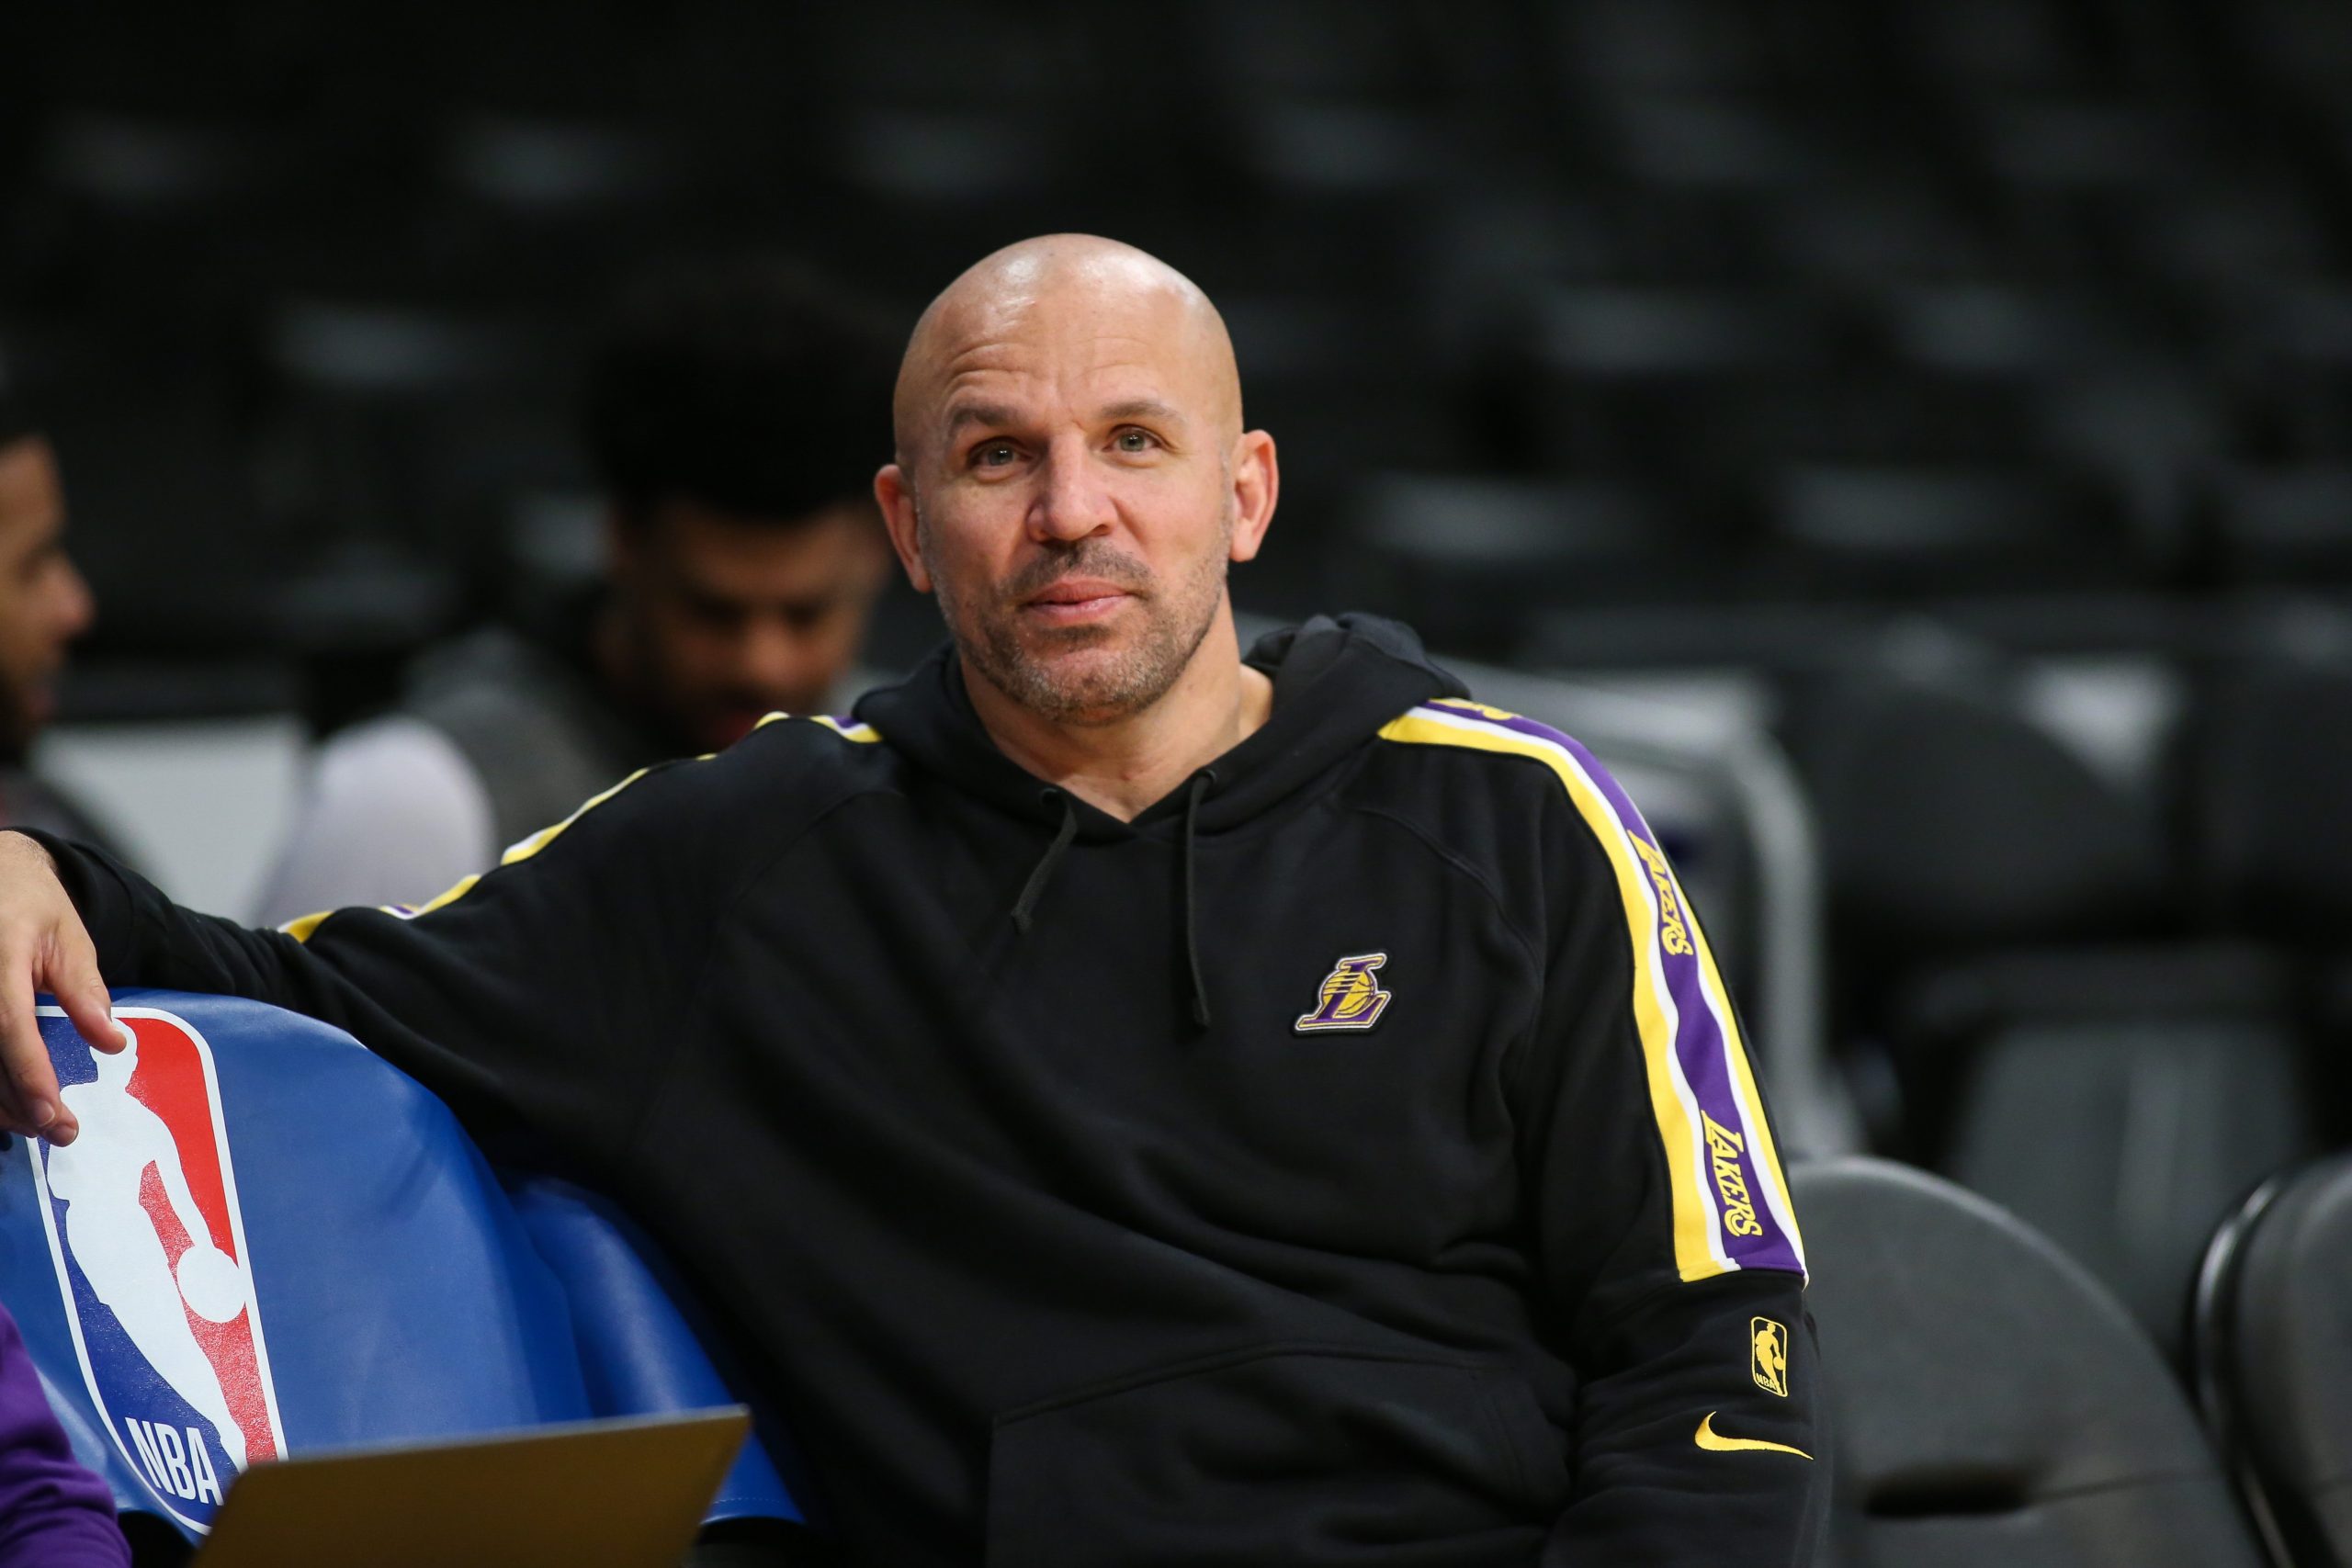 Kidd's Wife Accuses Nets Star of Serial Infidelity, Abuse